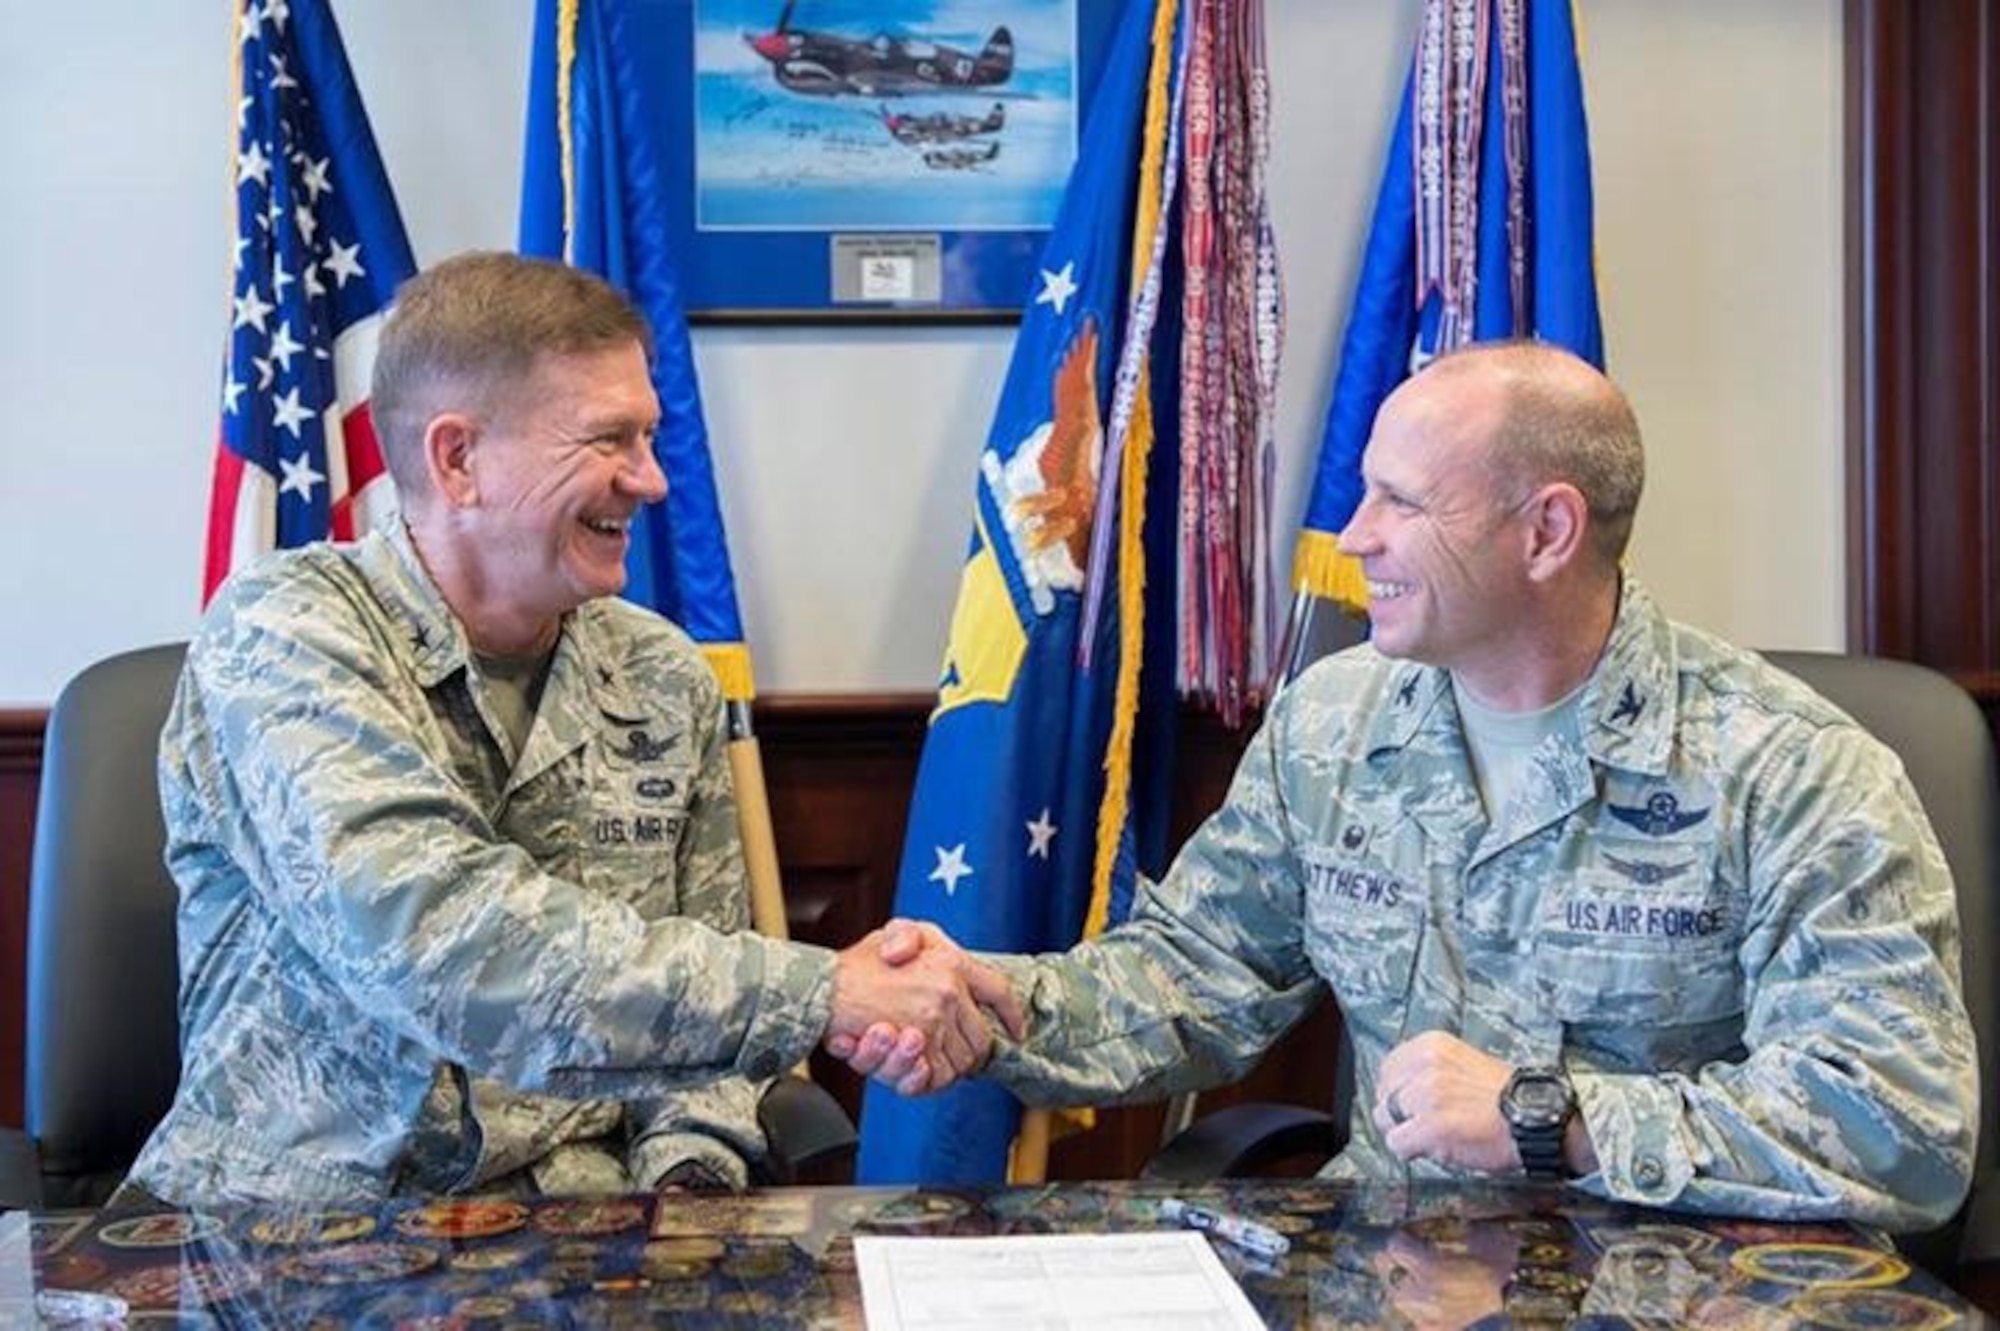 Brig. Gen. Wayne R. Monteith, left, 45th Space Wing commander, and Col. Kurt A. Matthews, 920th Rescue Wing commander, shake hands after signing a robust new support agreement April 21, 2017, to solidify their mission partnership. Even though the missions are distinctly different, working together ensures they maintain the greatest Air Force in the world. (U.S. Air Force photo/Matthew Jurgens)